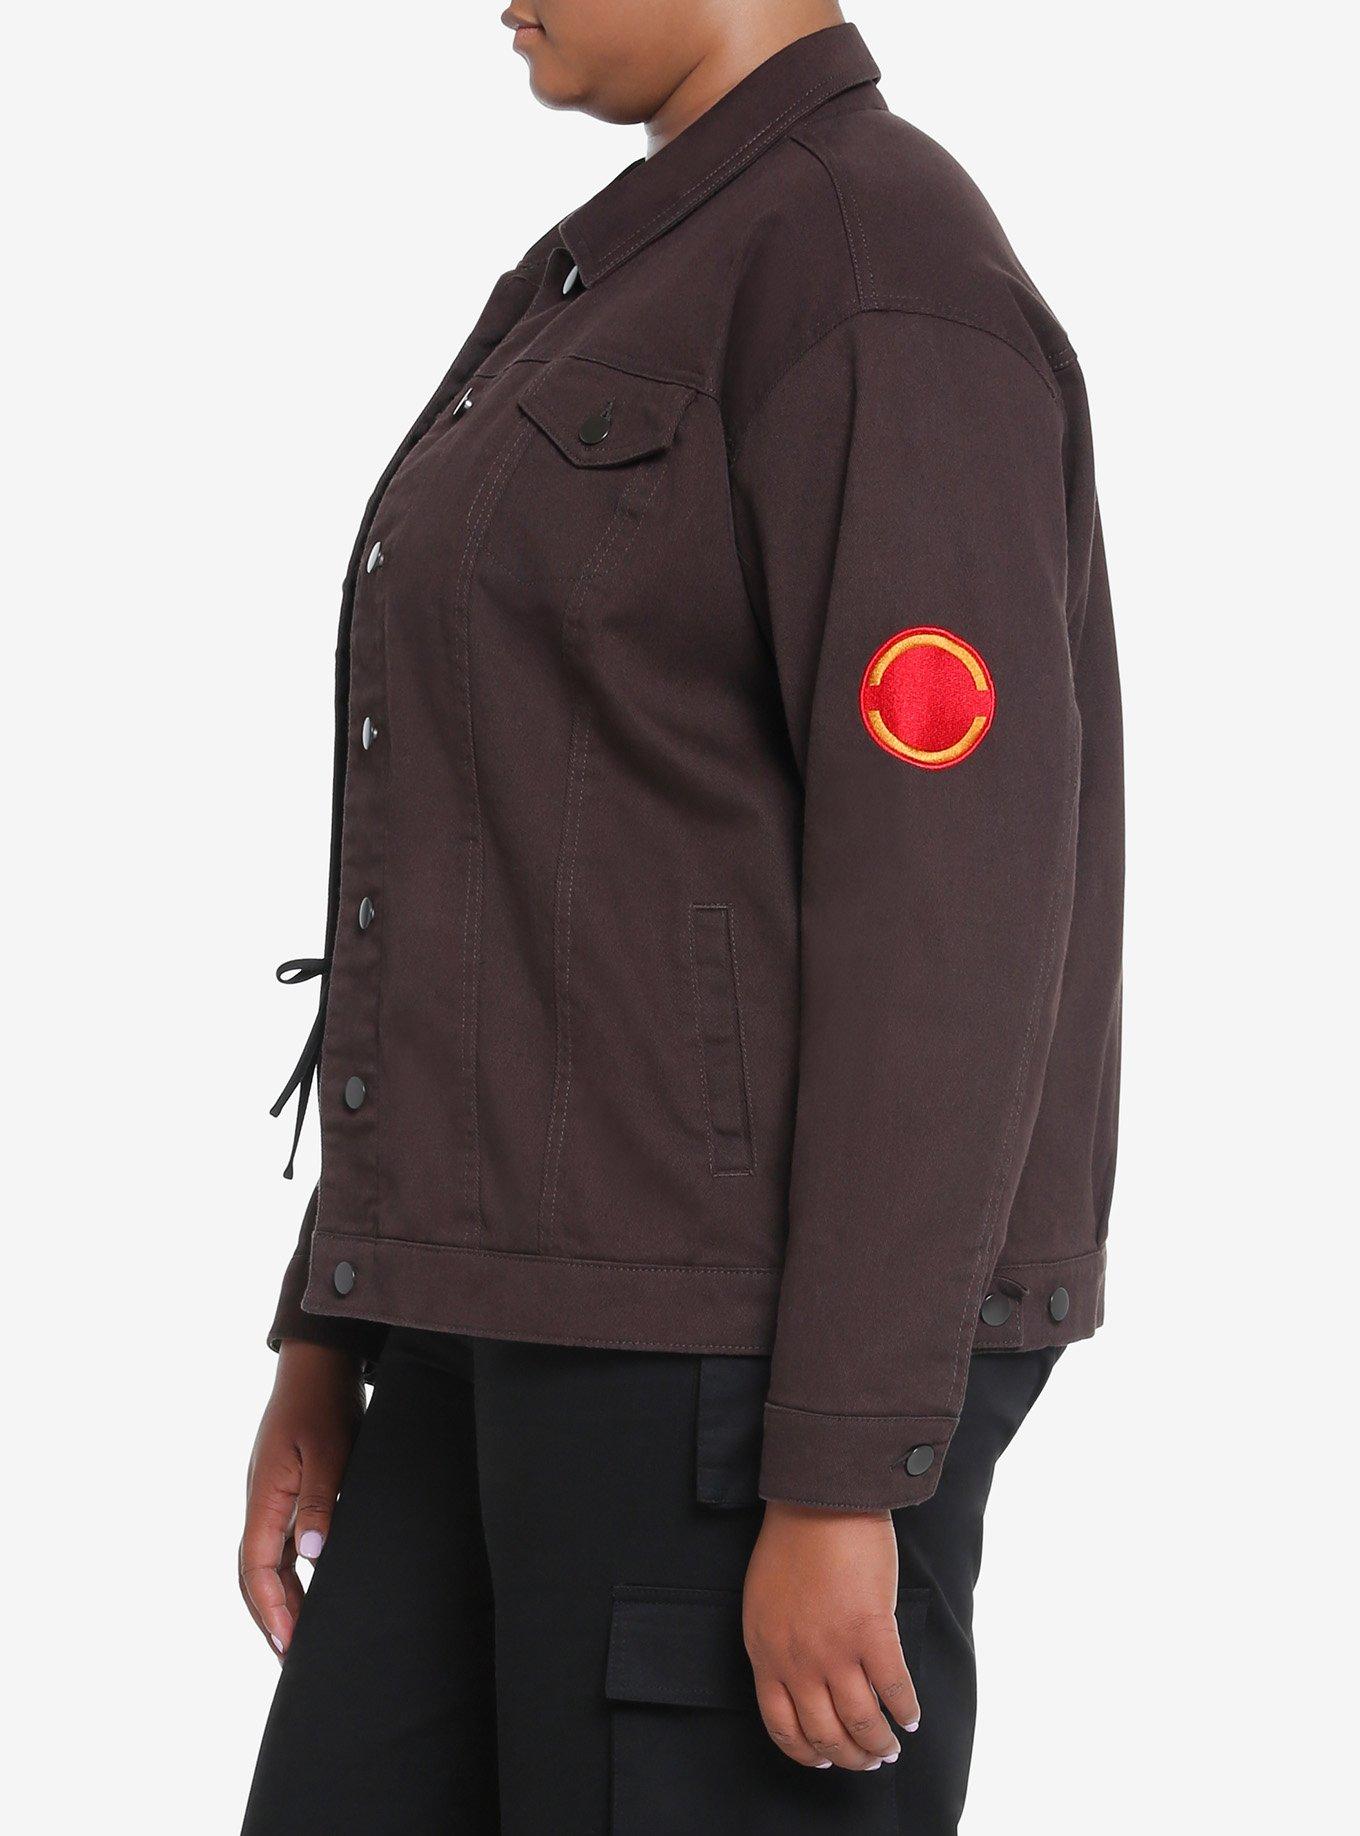 Her Universe Star Wars Ahsoka Hera Syndulla Patches Jacket Plus Size Her Universe Exclusive, MULTI, alternate